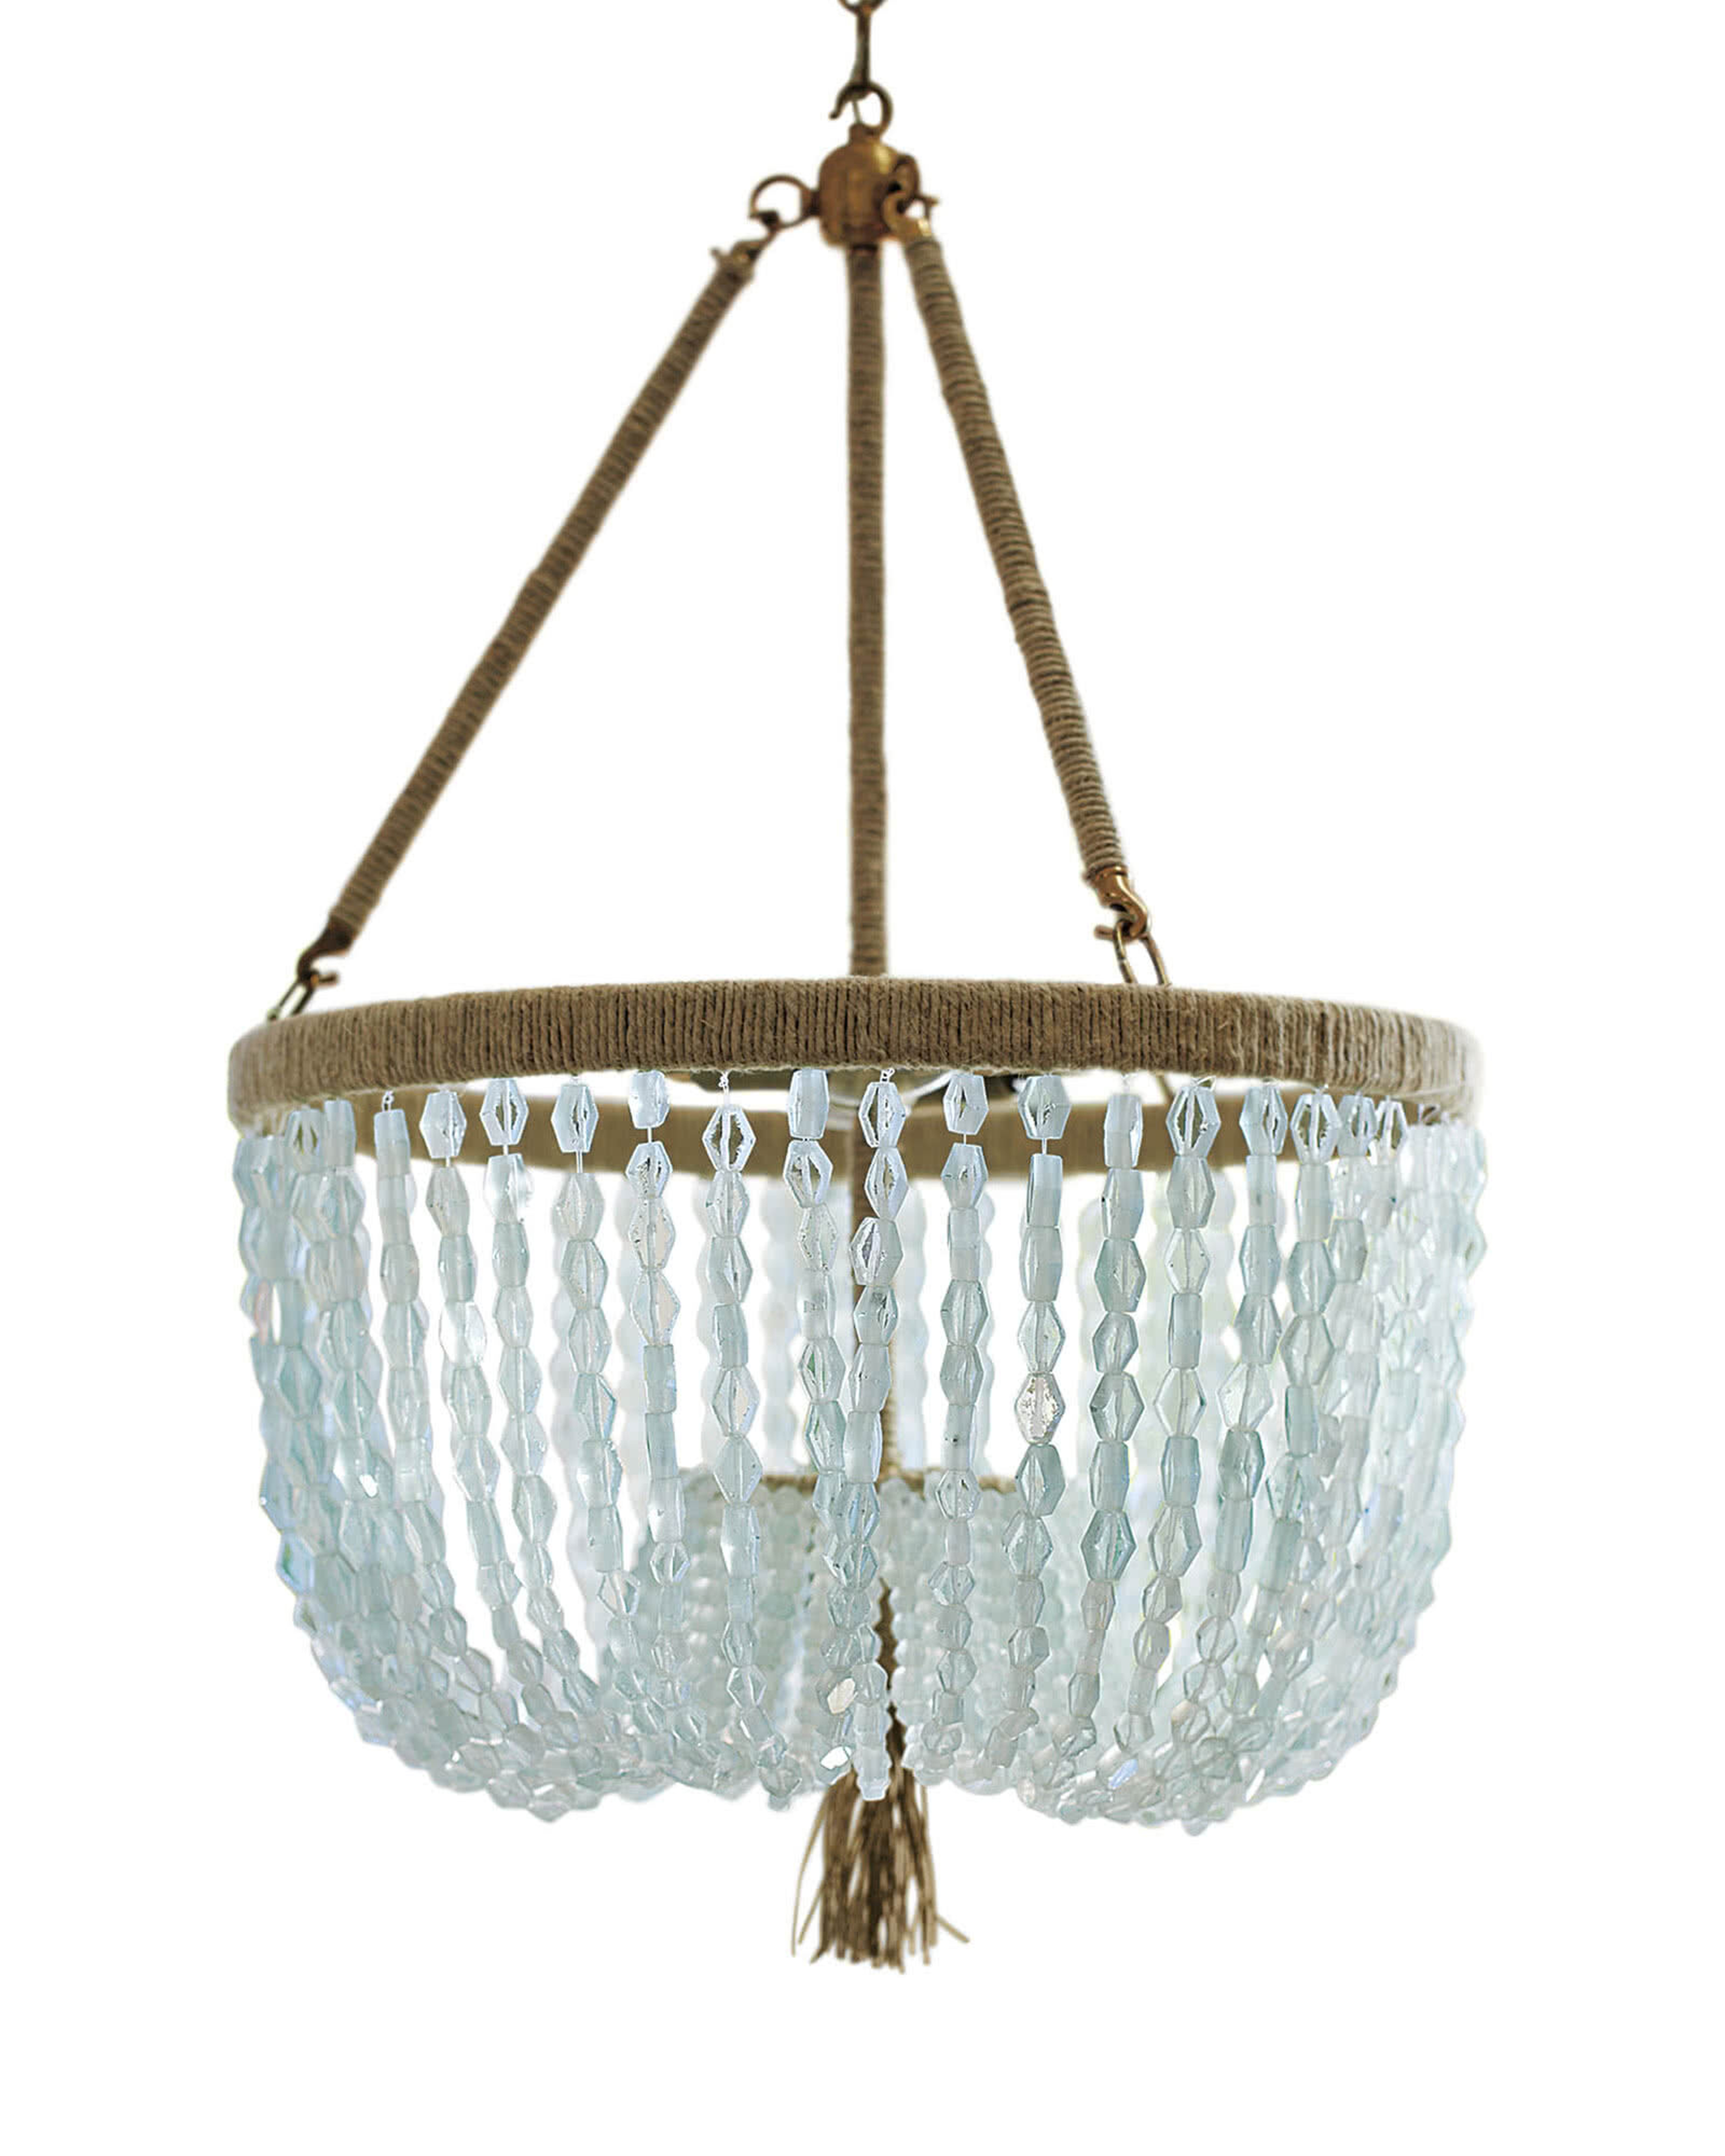 Seychelles Chandelier - Serena and Lily